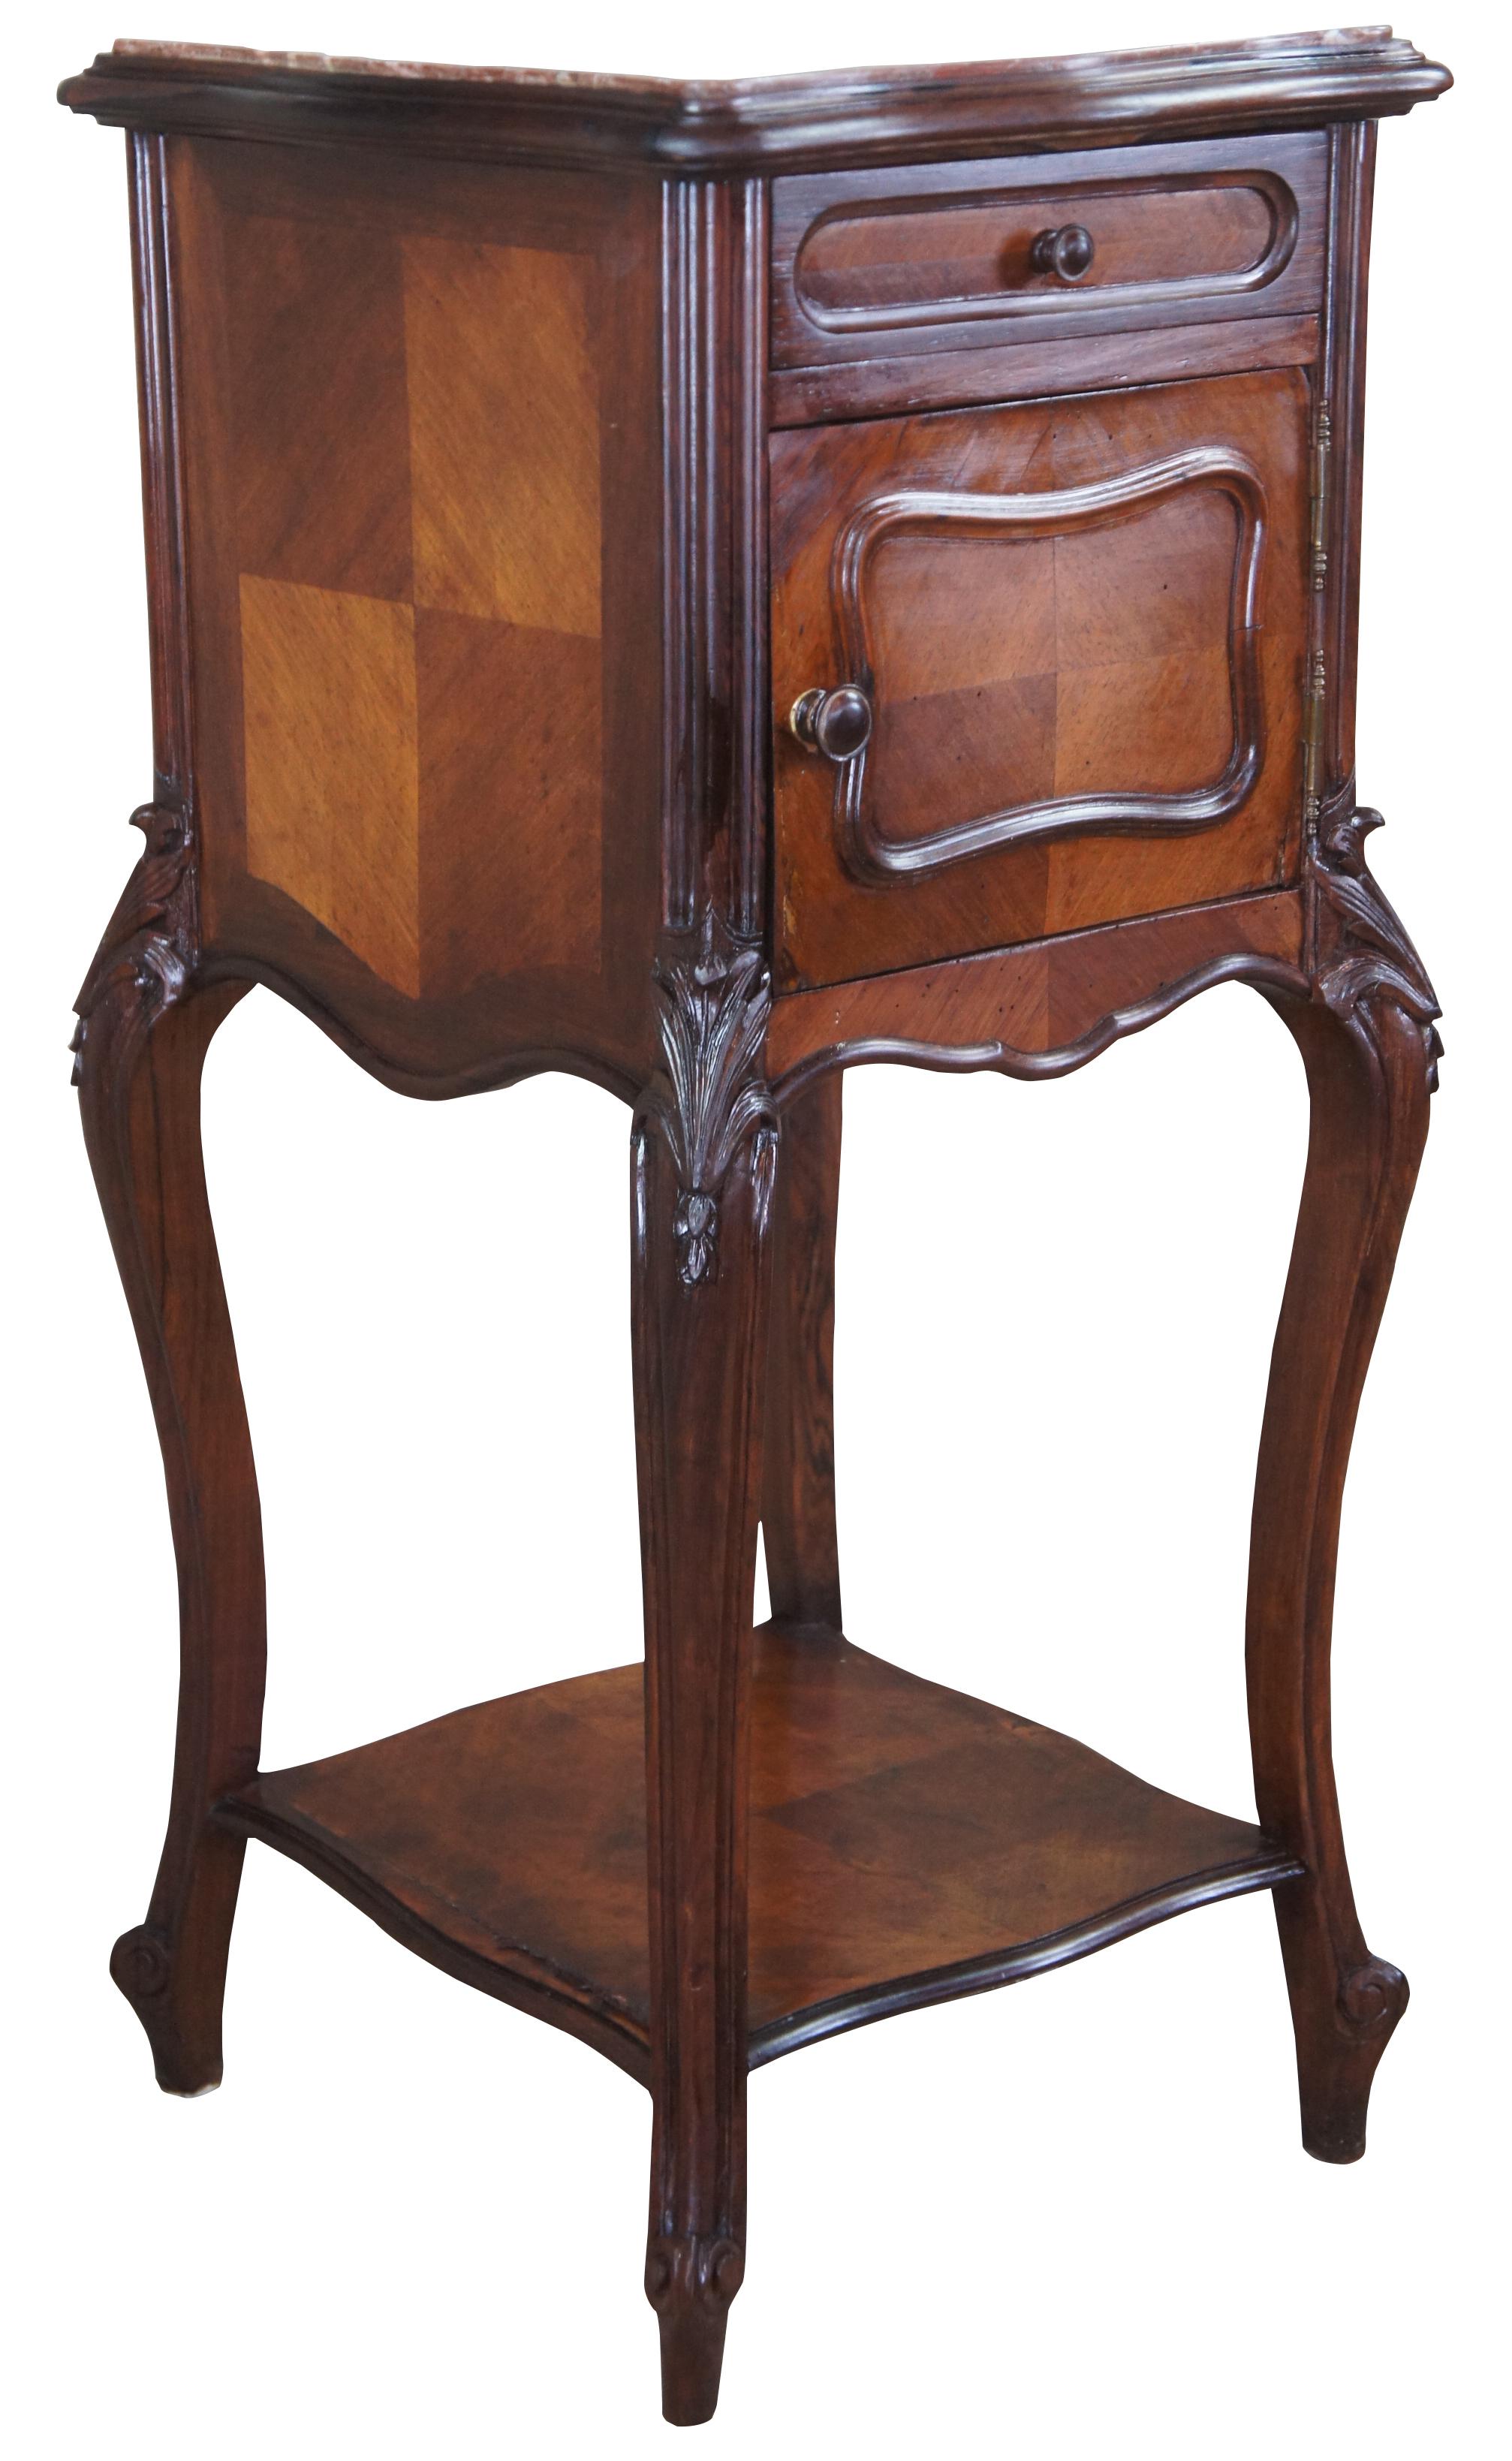 Antique Louis XV French humidor cabinet side table. Made of walnut featuring a serpentine form with two tiers, inset marble top, Matchbook veneered (parquetry) accents, one cabinet (humidor) lined with marble, one dovetailed drawer and scrolled